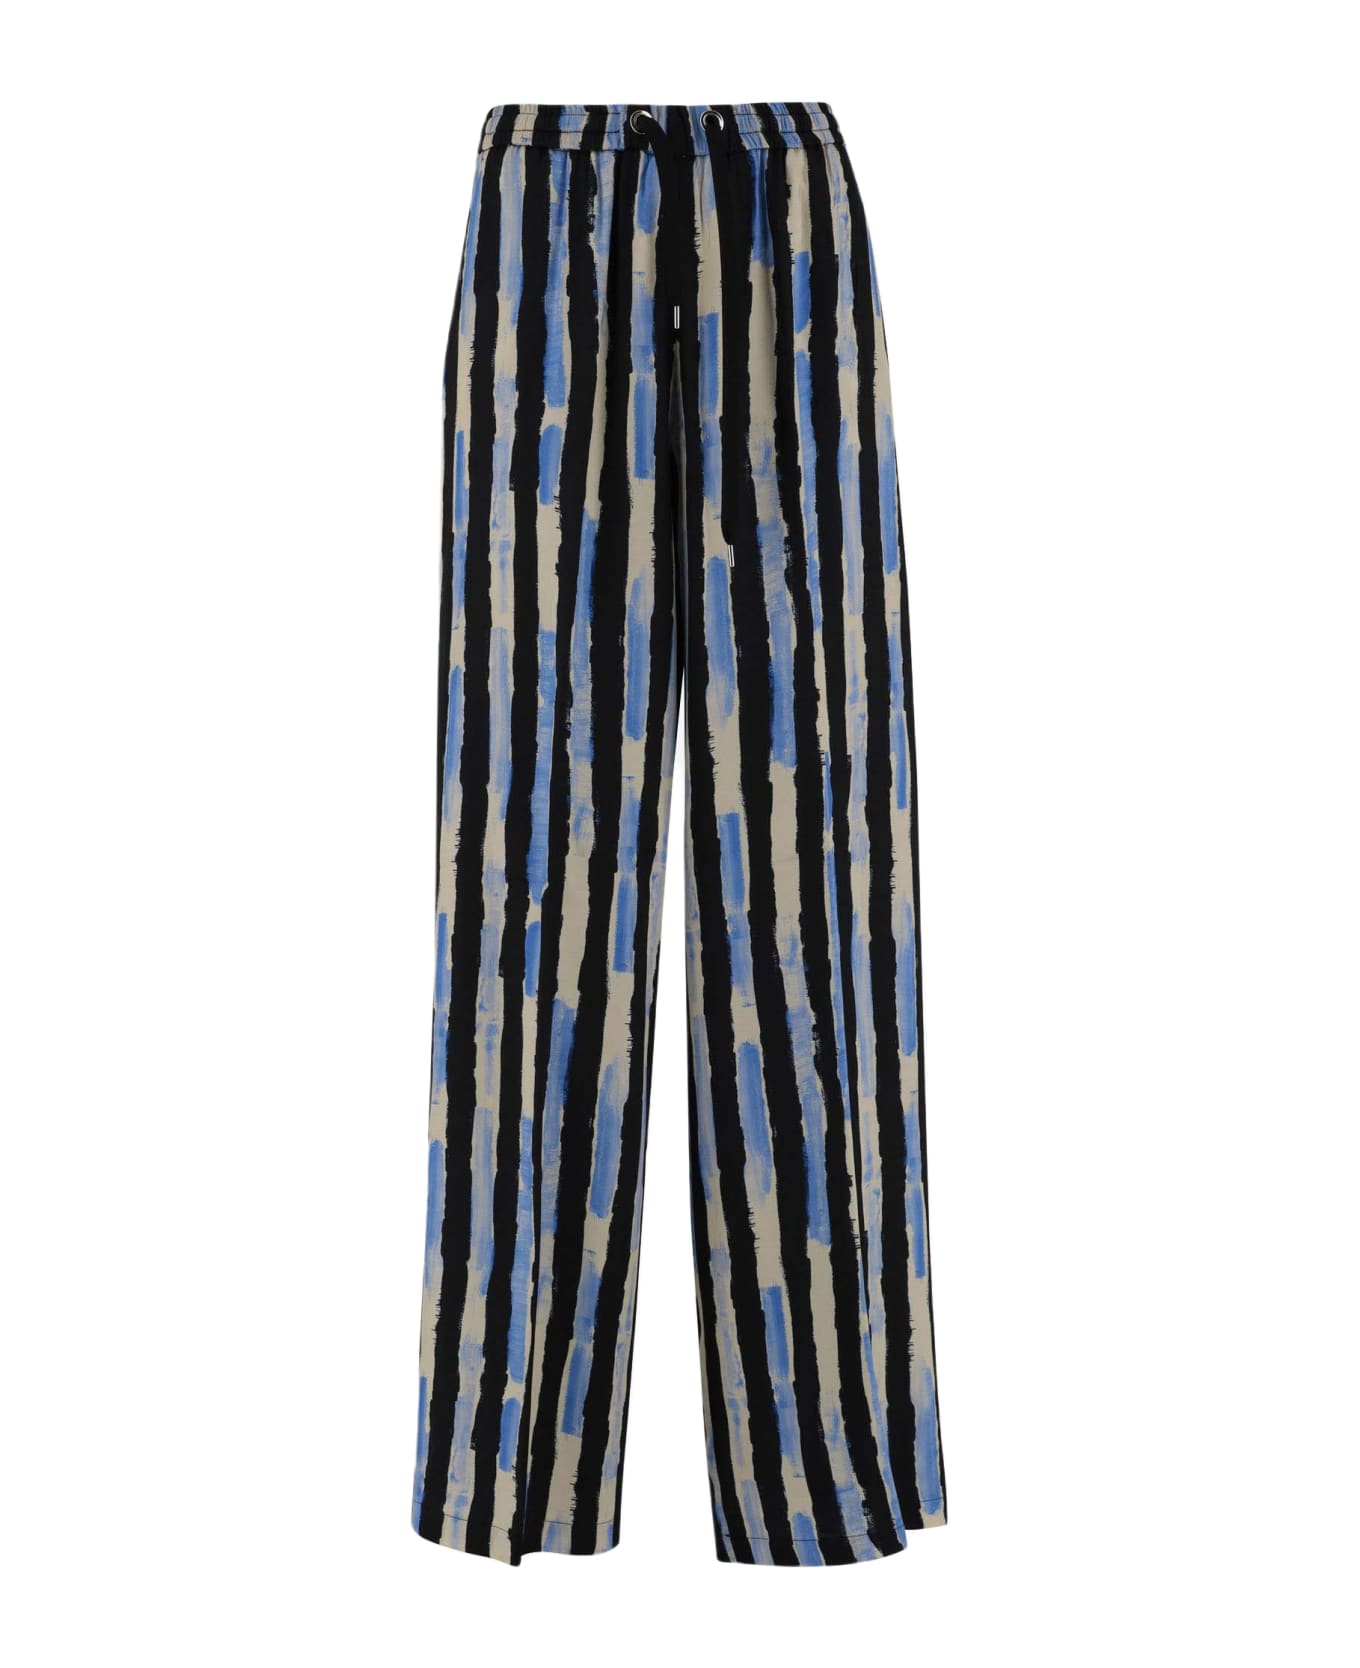 Pinko Viscose Twill Pants With Striped Pattern - Red ボトムス